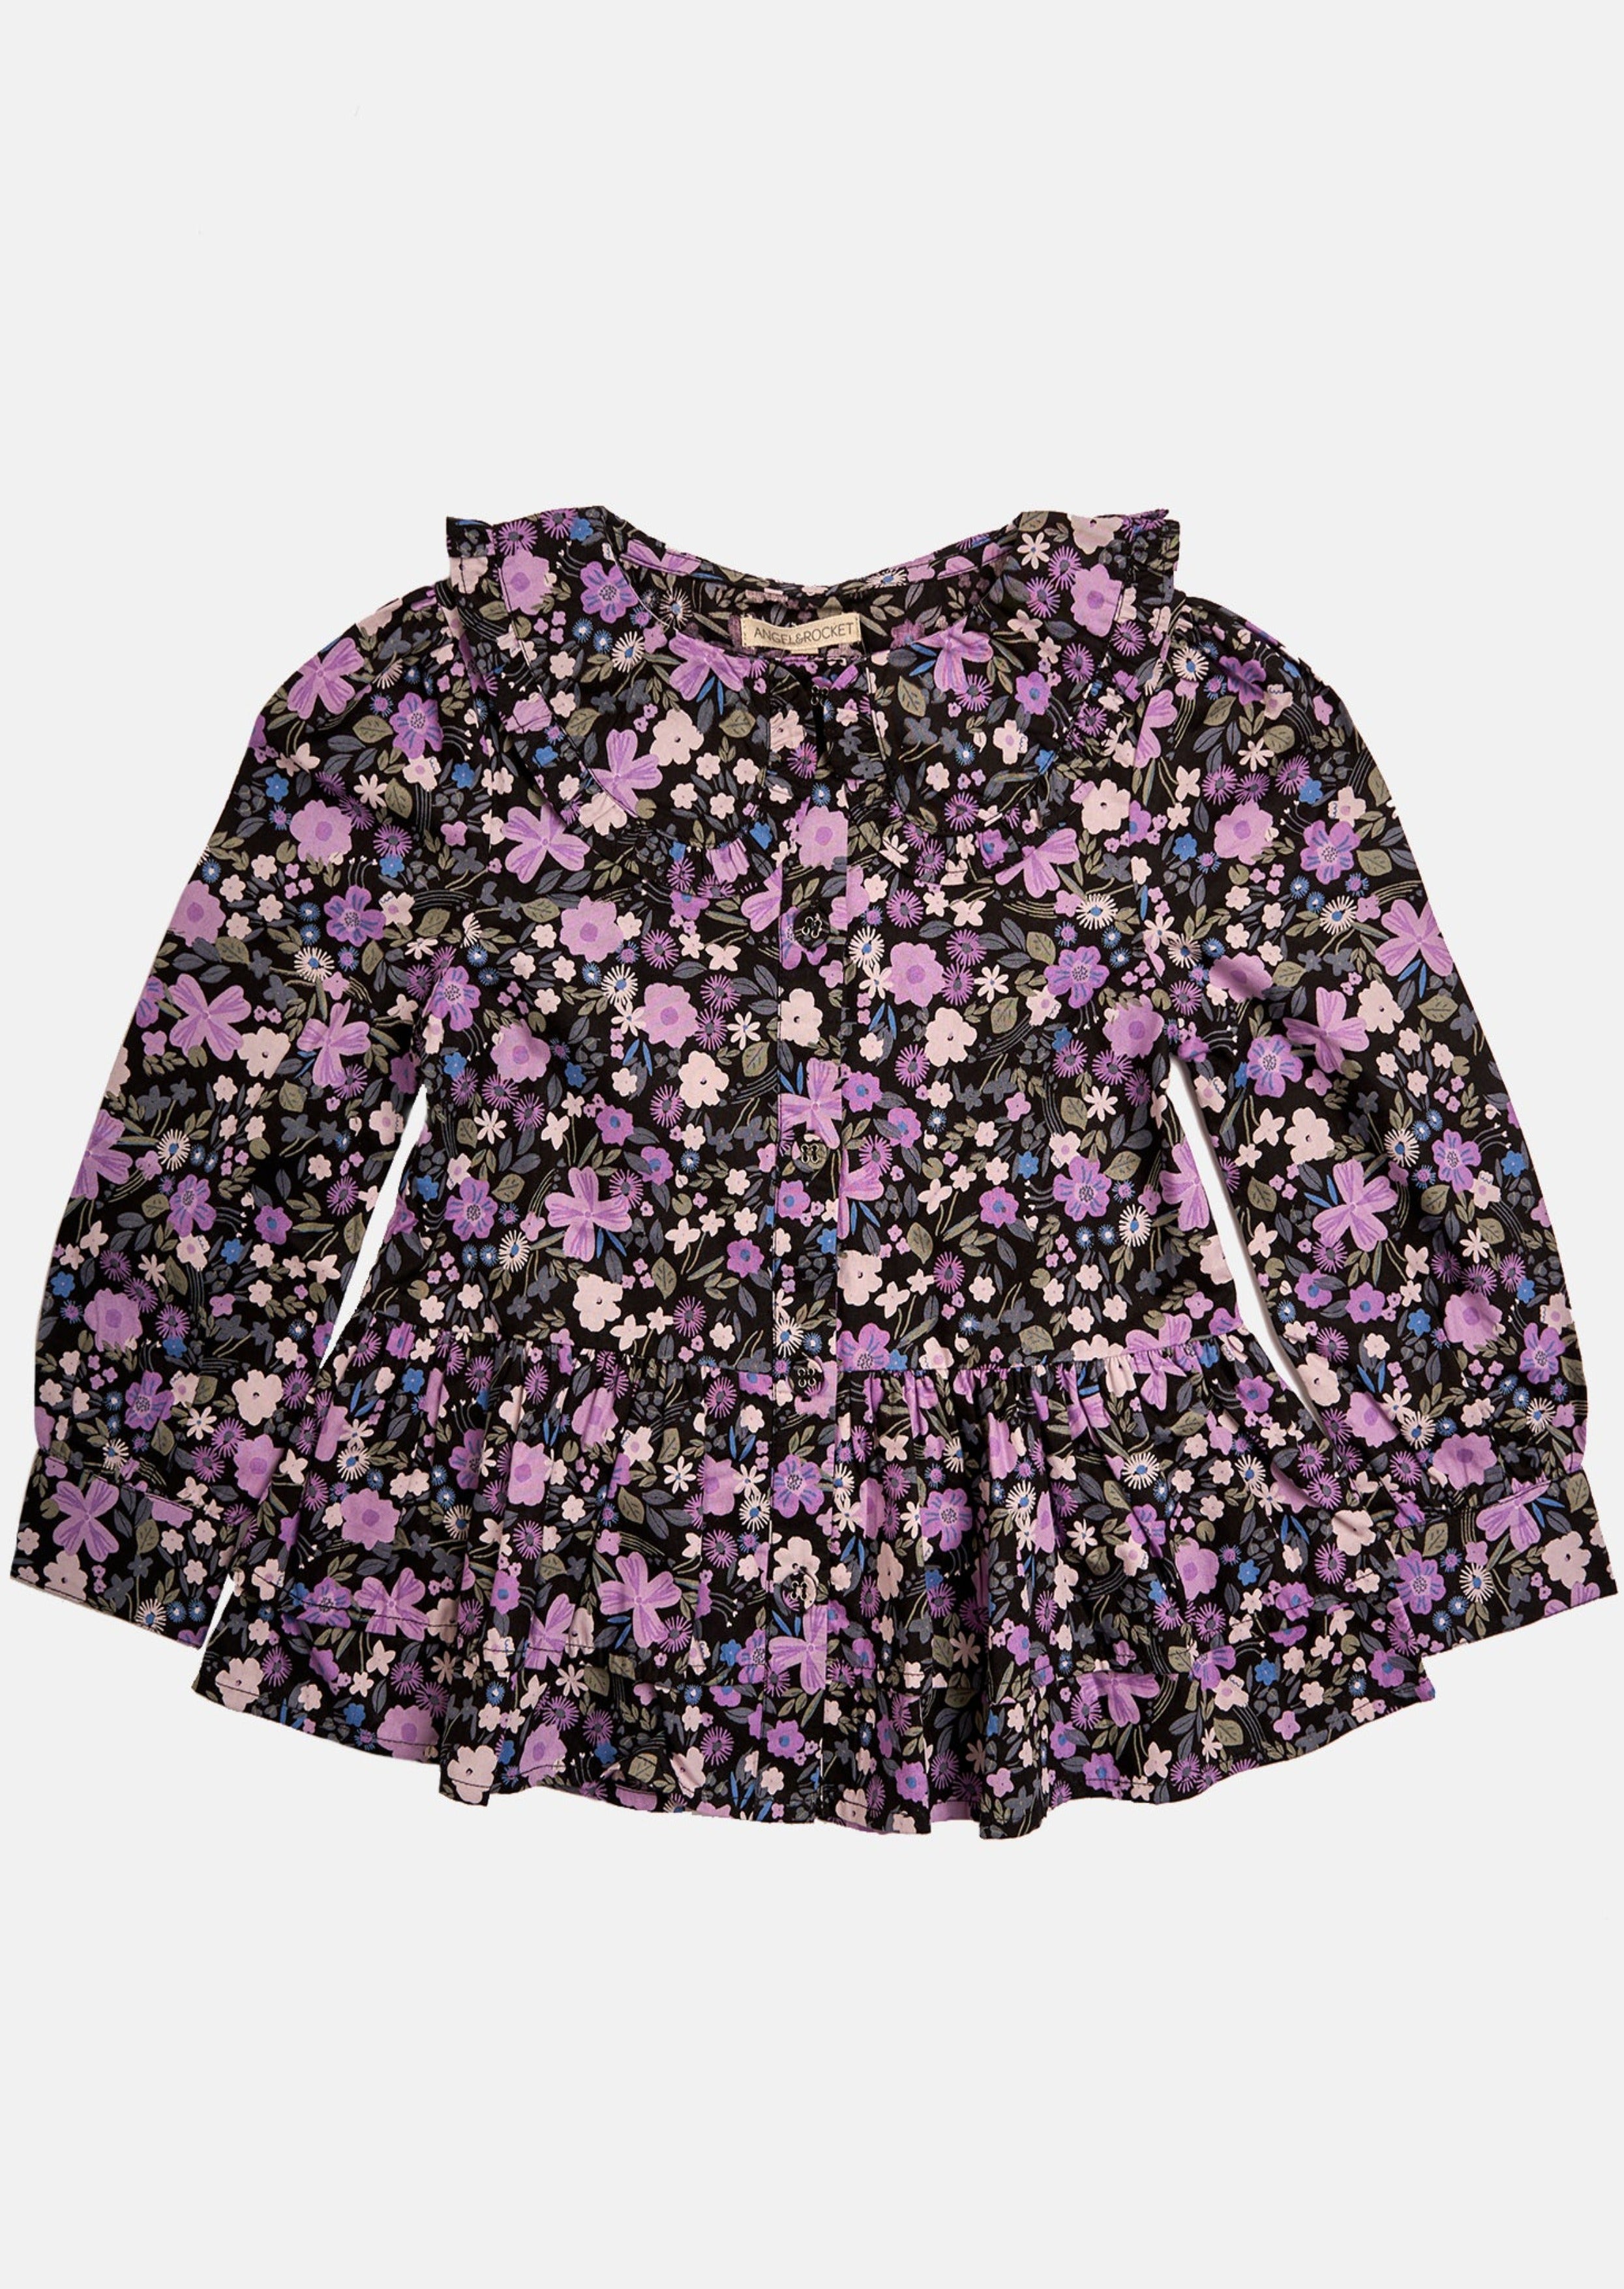 Girls Floral Printed Full Sleeves Cotton Shirt Top